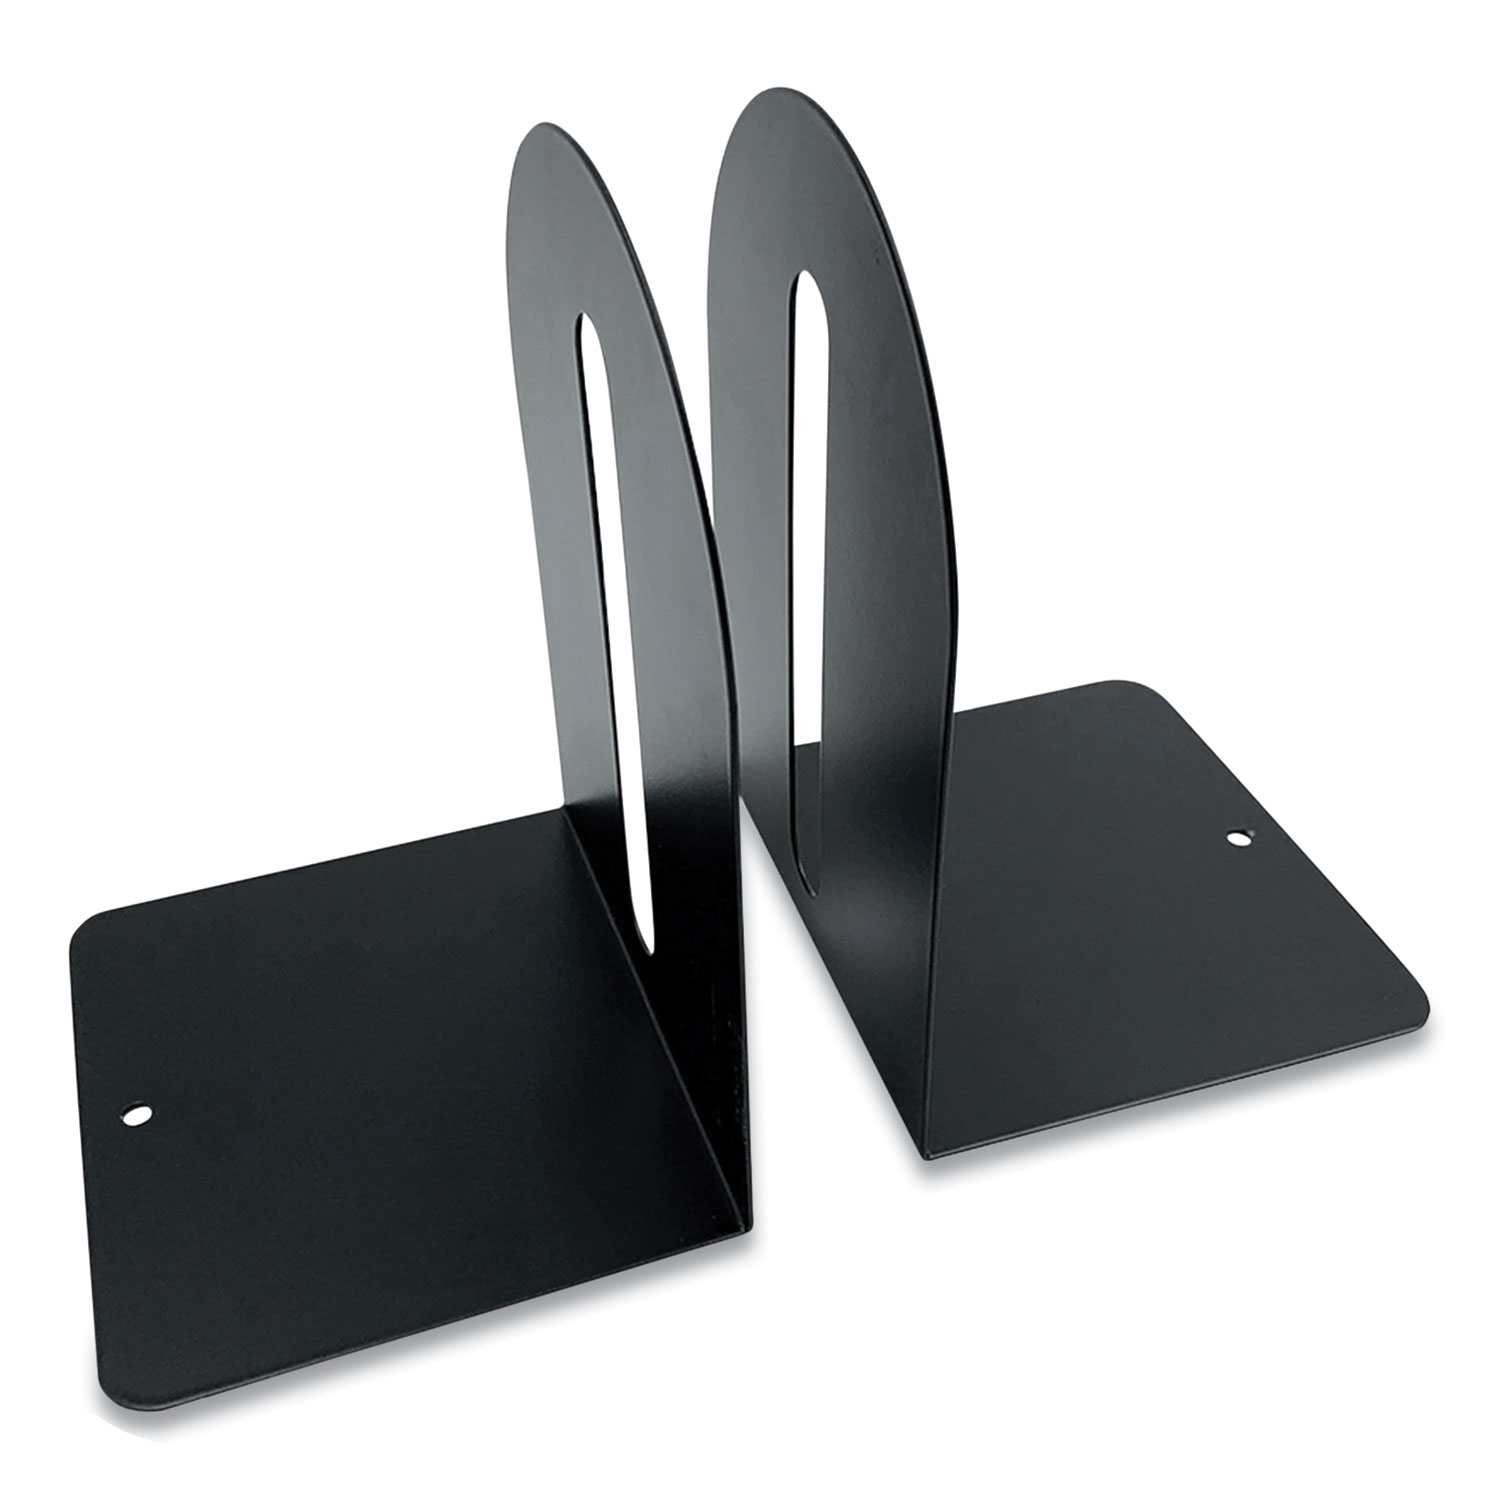 Huron Steel Bookends, Fashion Style, 5.5 x 4.75 x 7.25, Black